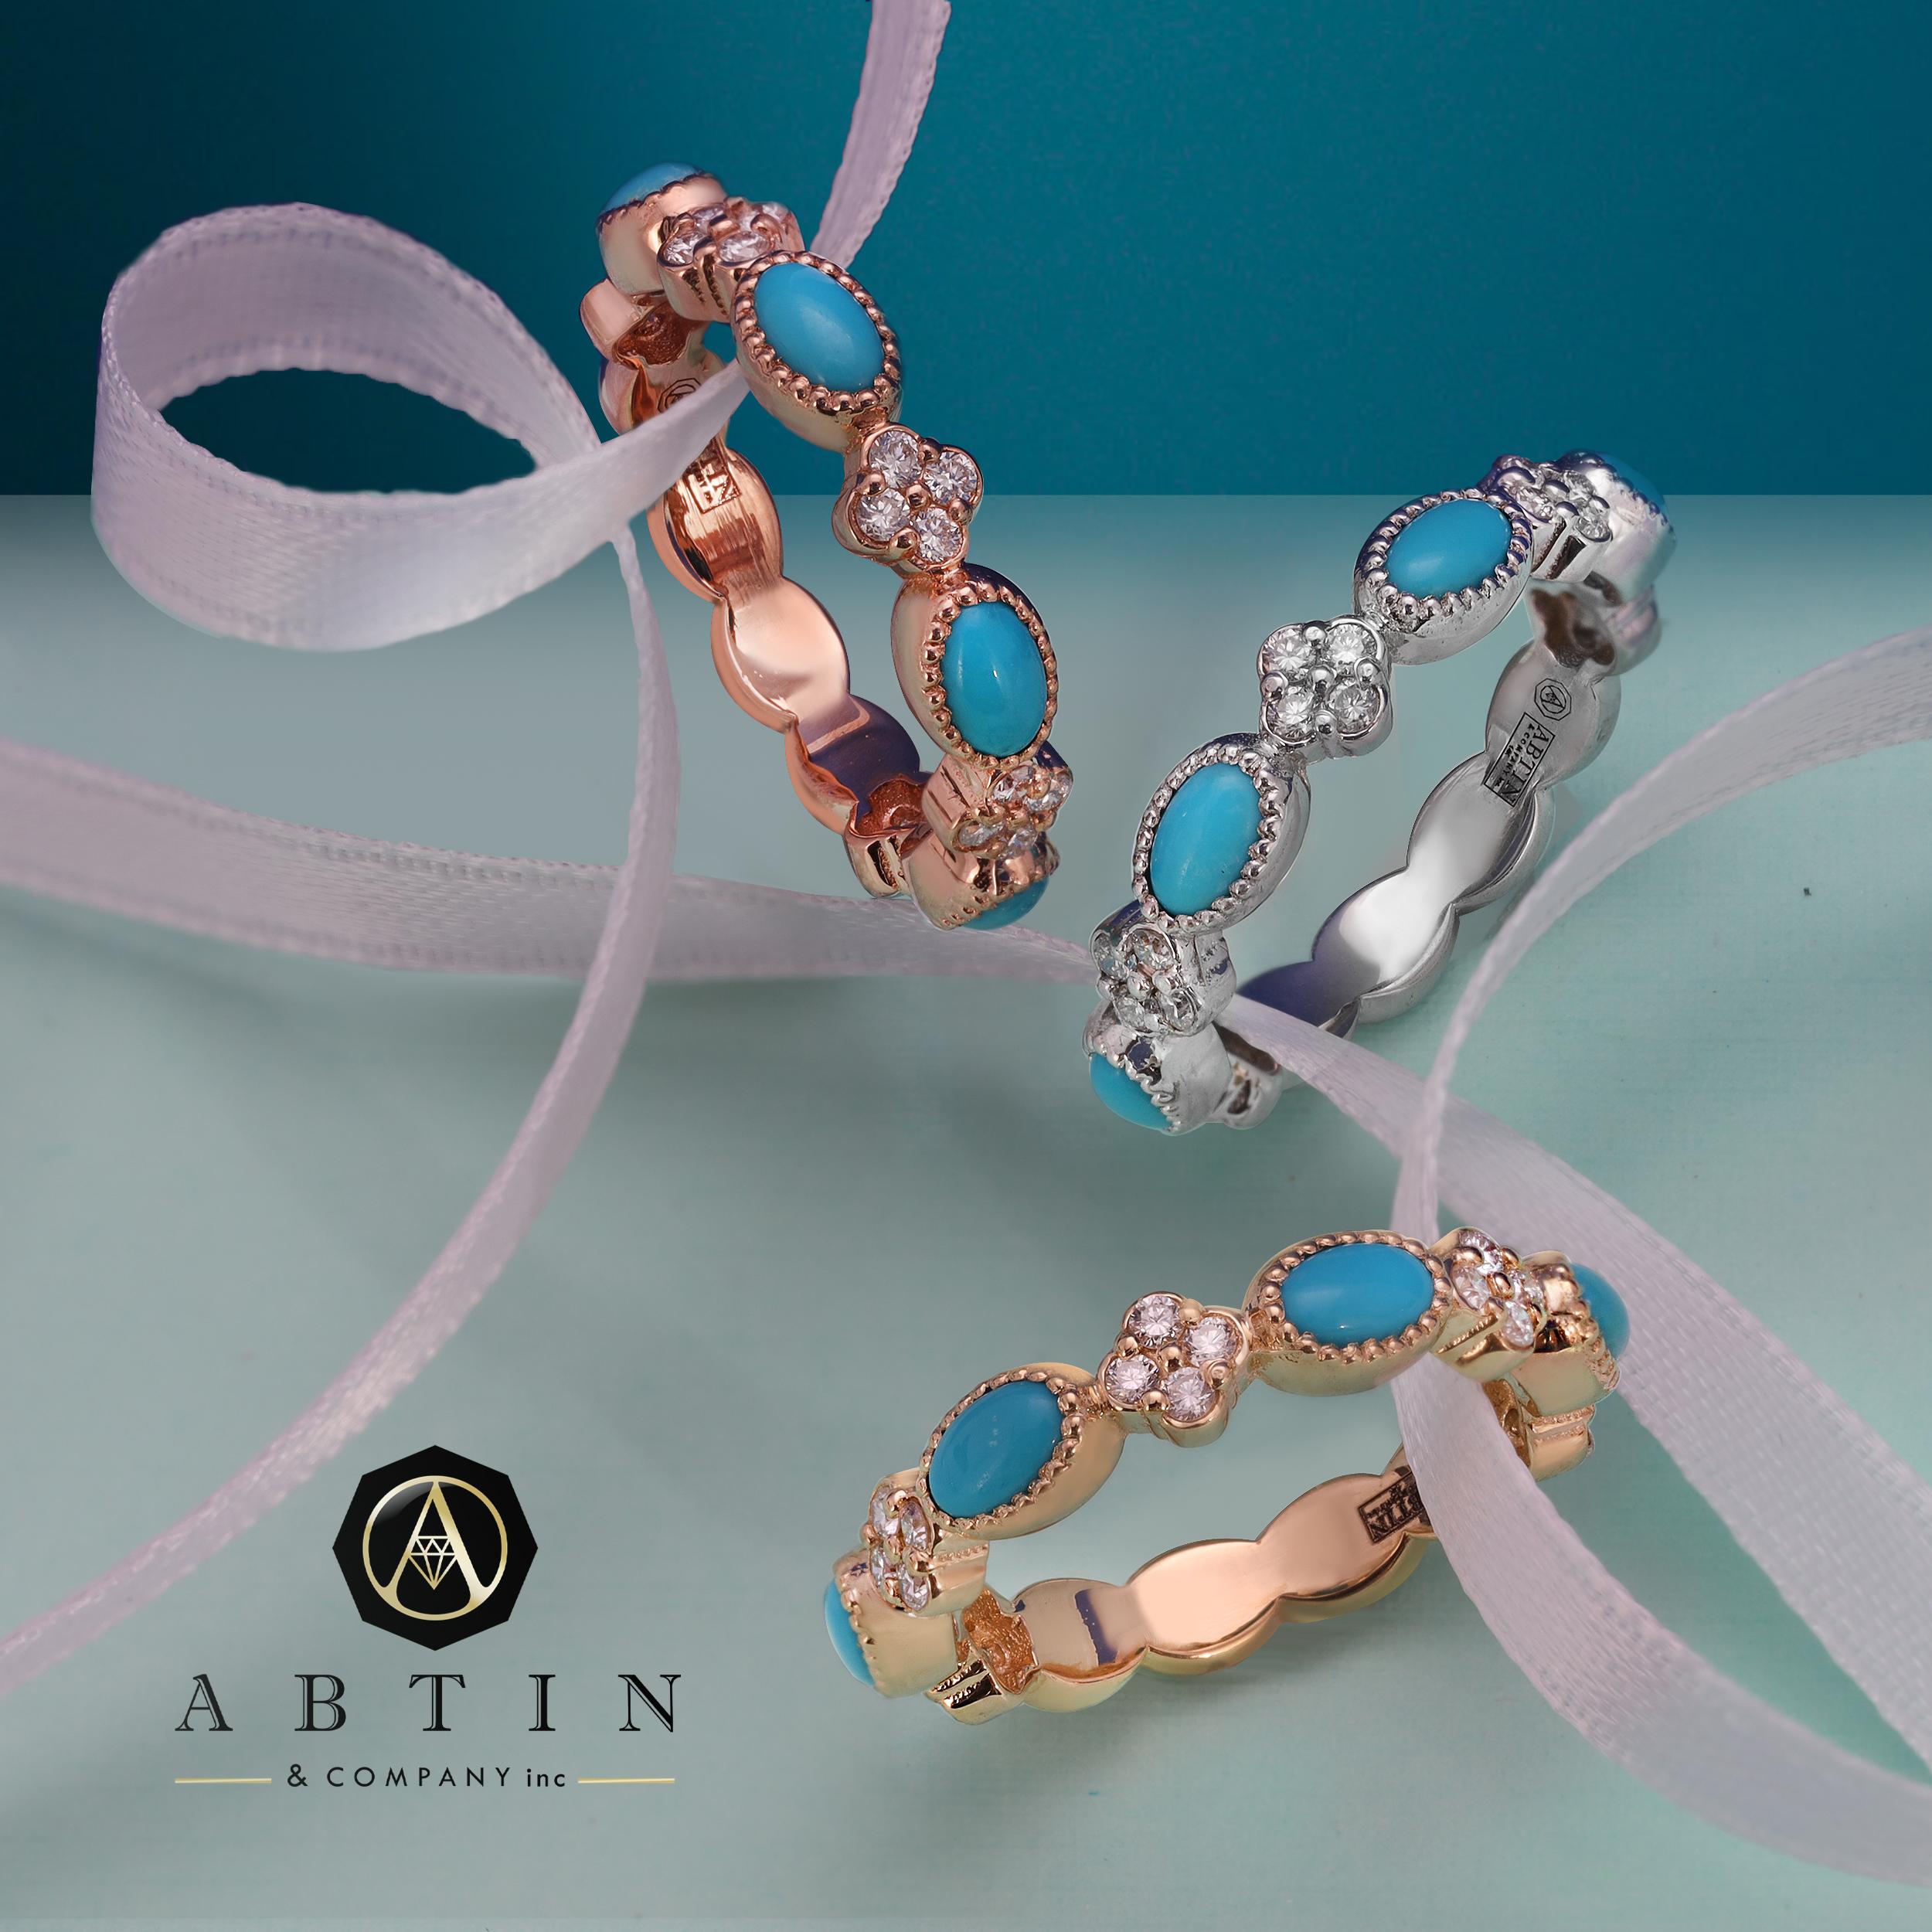 The Most Prominent Piece of Fashion: Crafted in 14K gold, this stunning ring features a turquoise stone surrounded by round-cut diamonds set in the shape of a flower circling three-quarters. This band is the ideal present to honor years of wedded